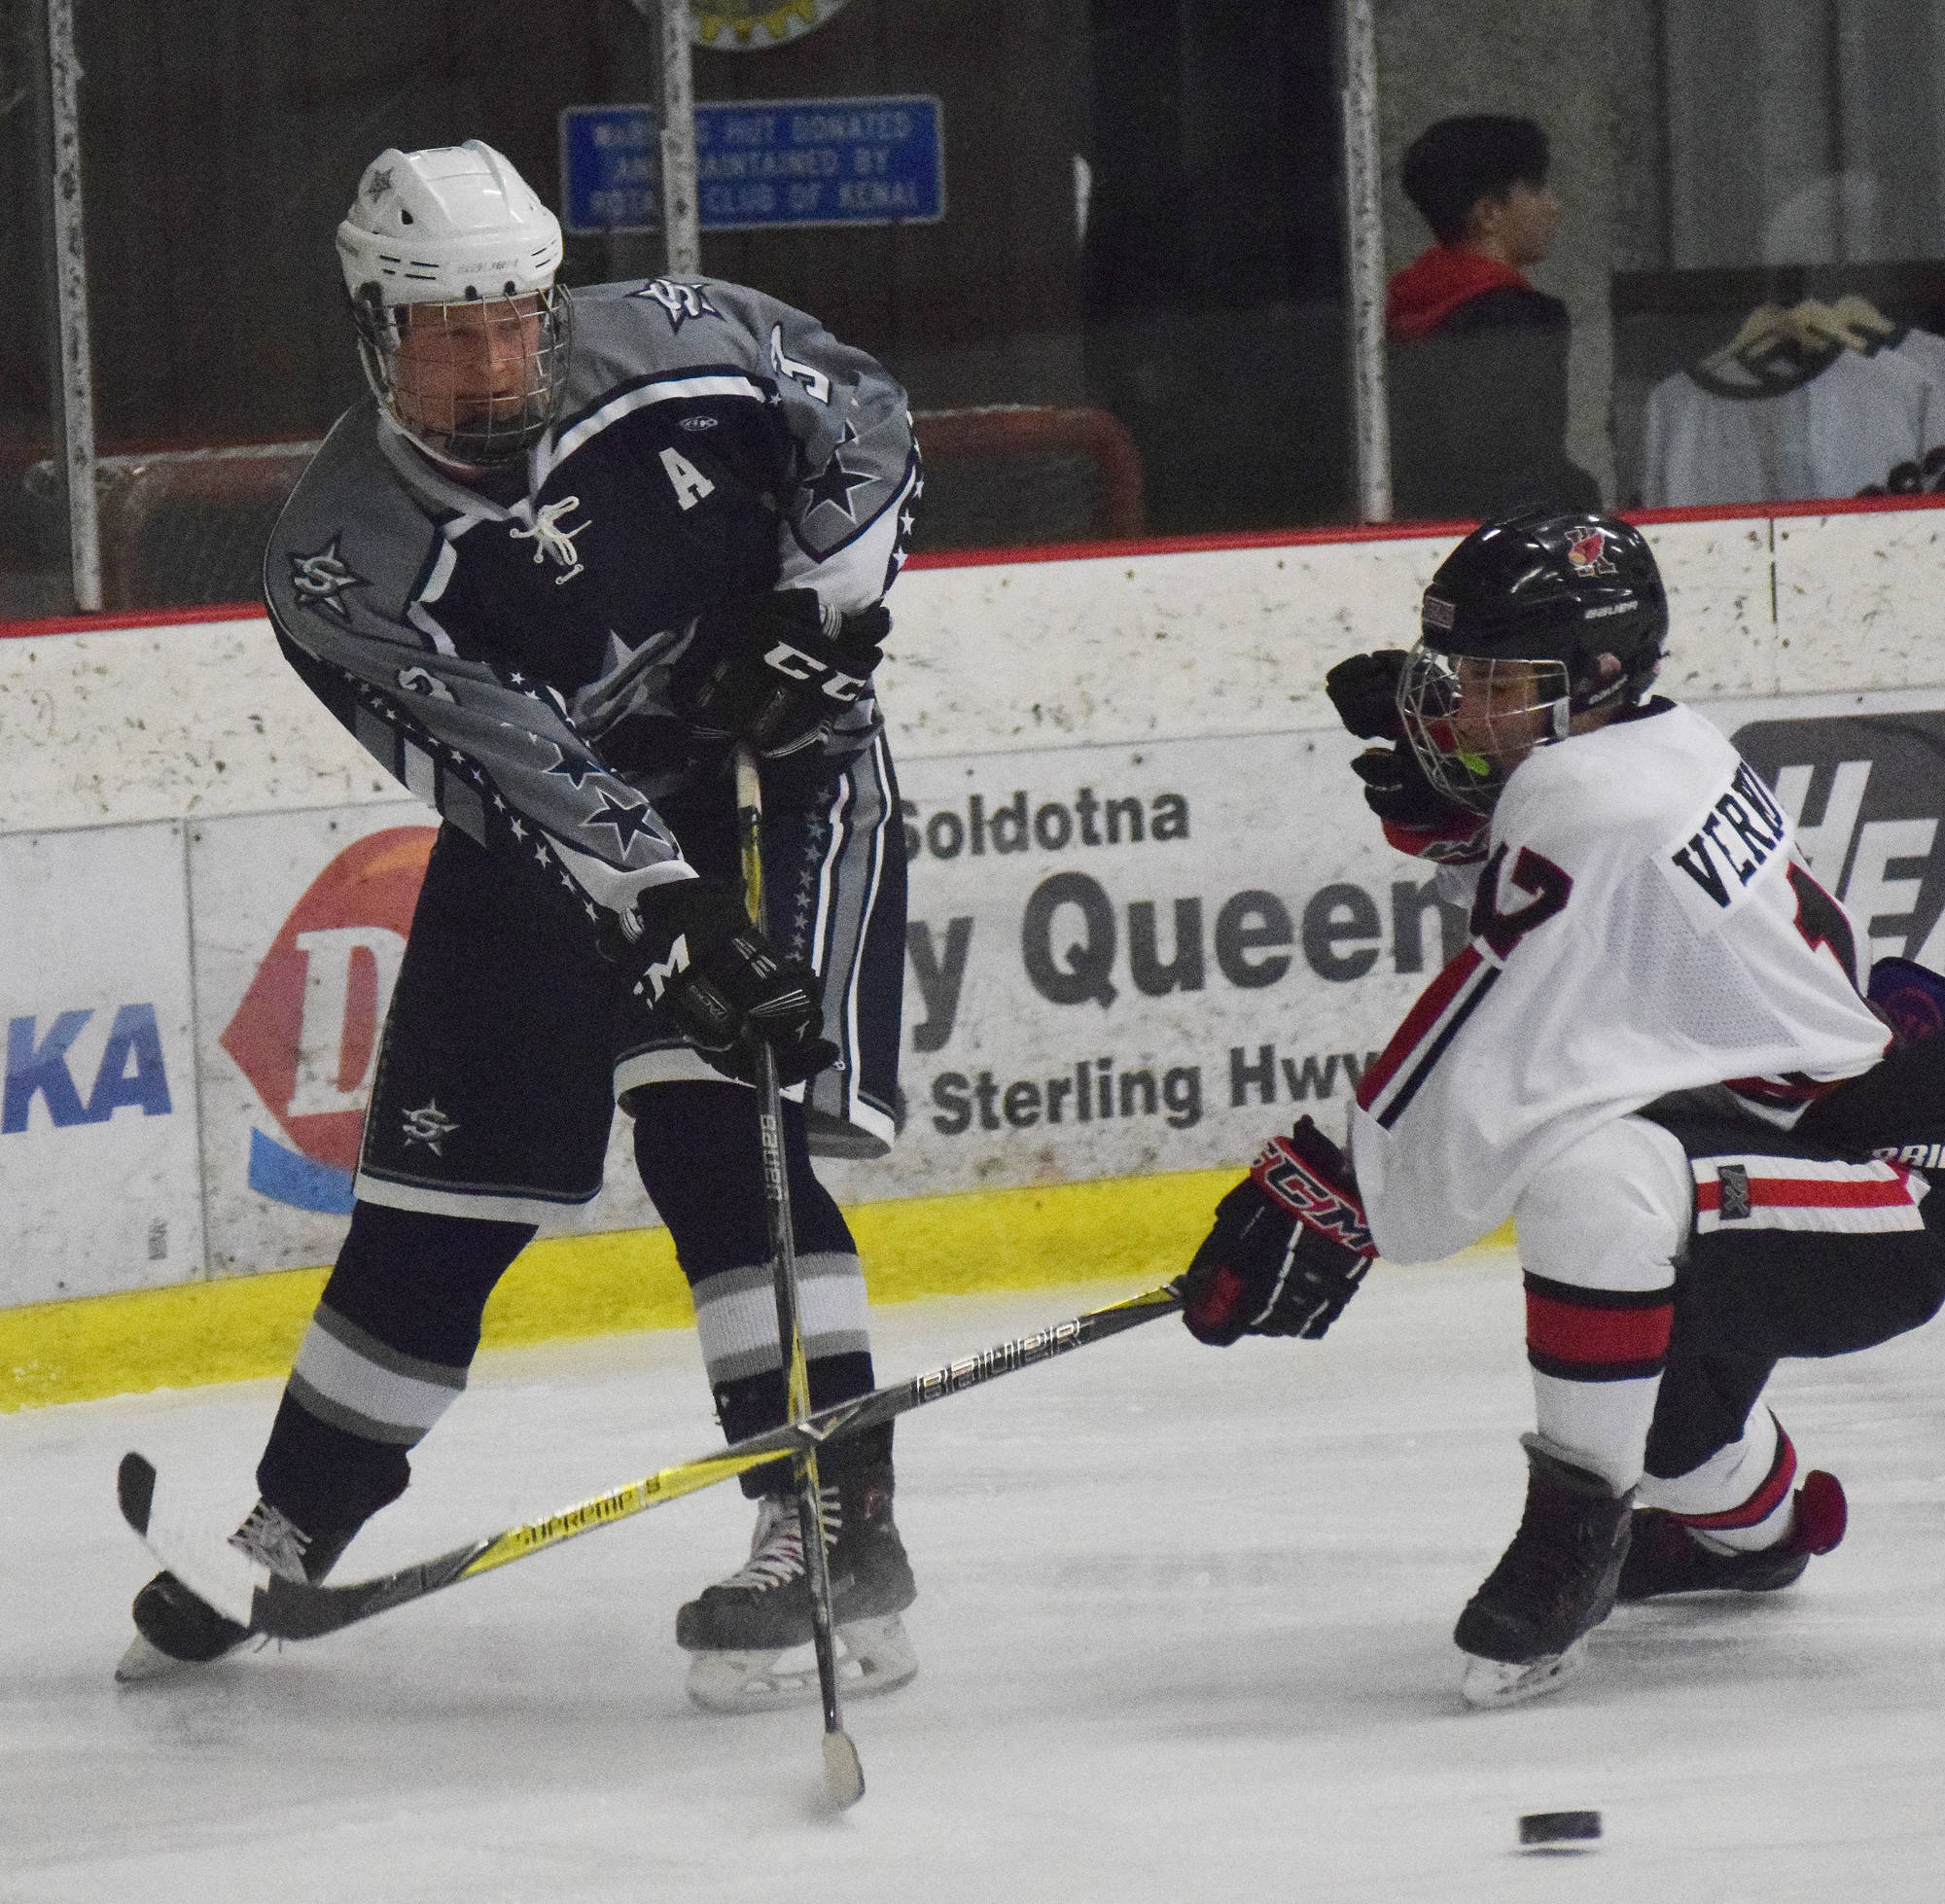 Soldotna’s Galen Brantley III keeps the puck away from Kenai Central’s Travis Verkuilen (right) Dec. 20, 2018, evening at the Kenai Multi-Purpose Facility. (Photo by Joey Klecka/Peninsula Clarion)